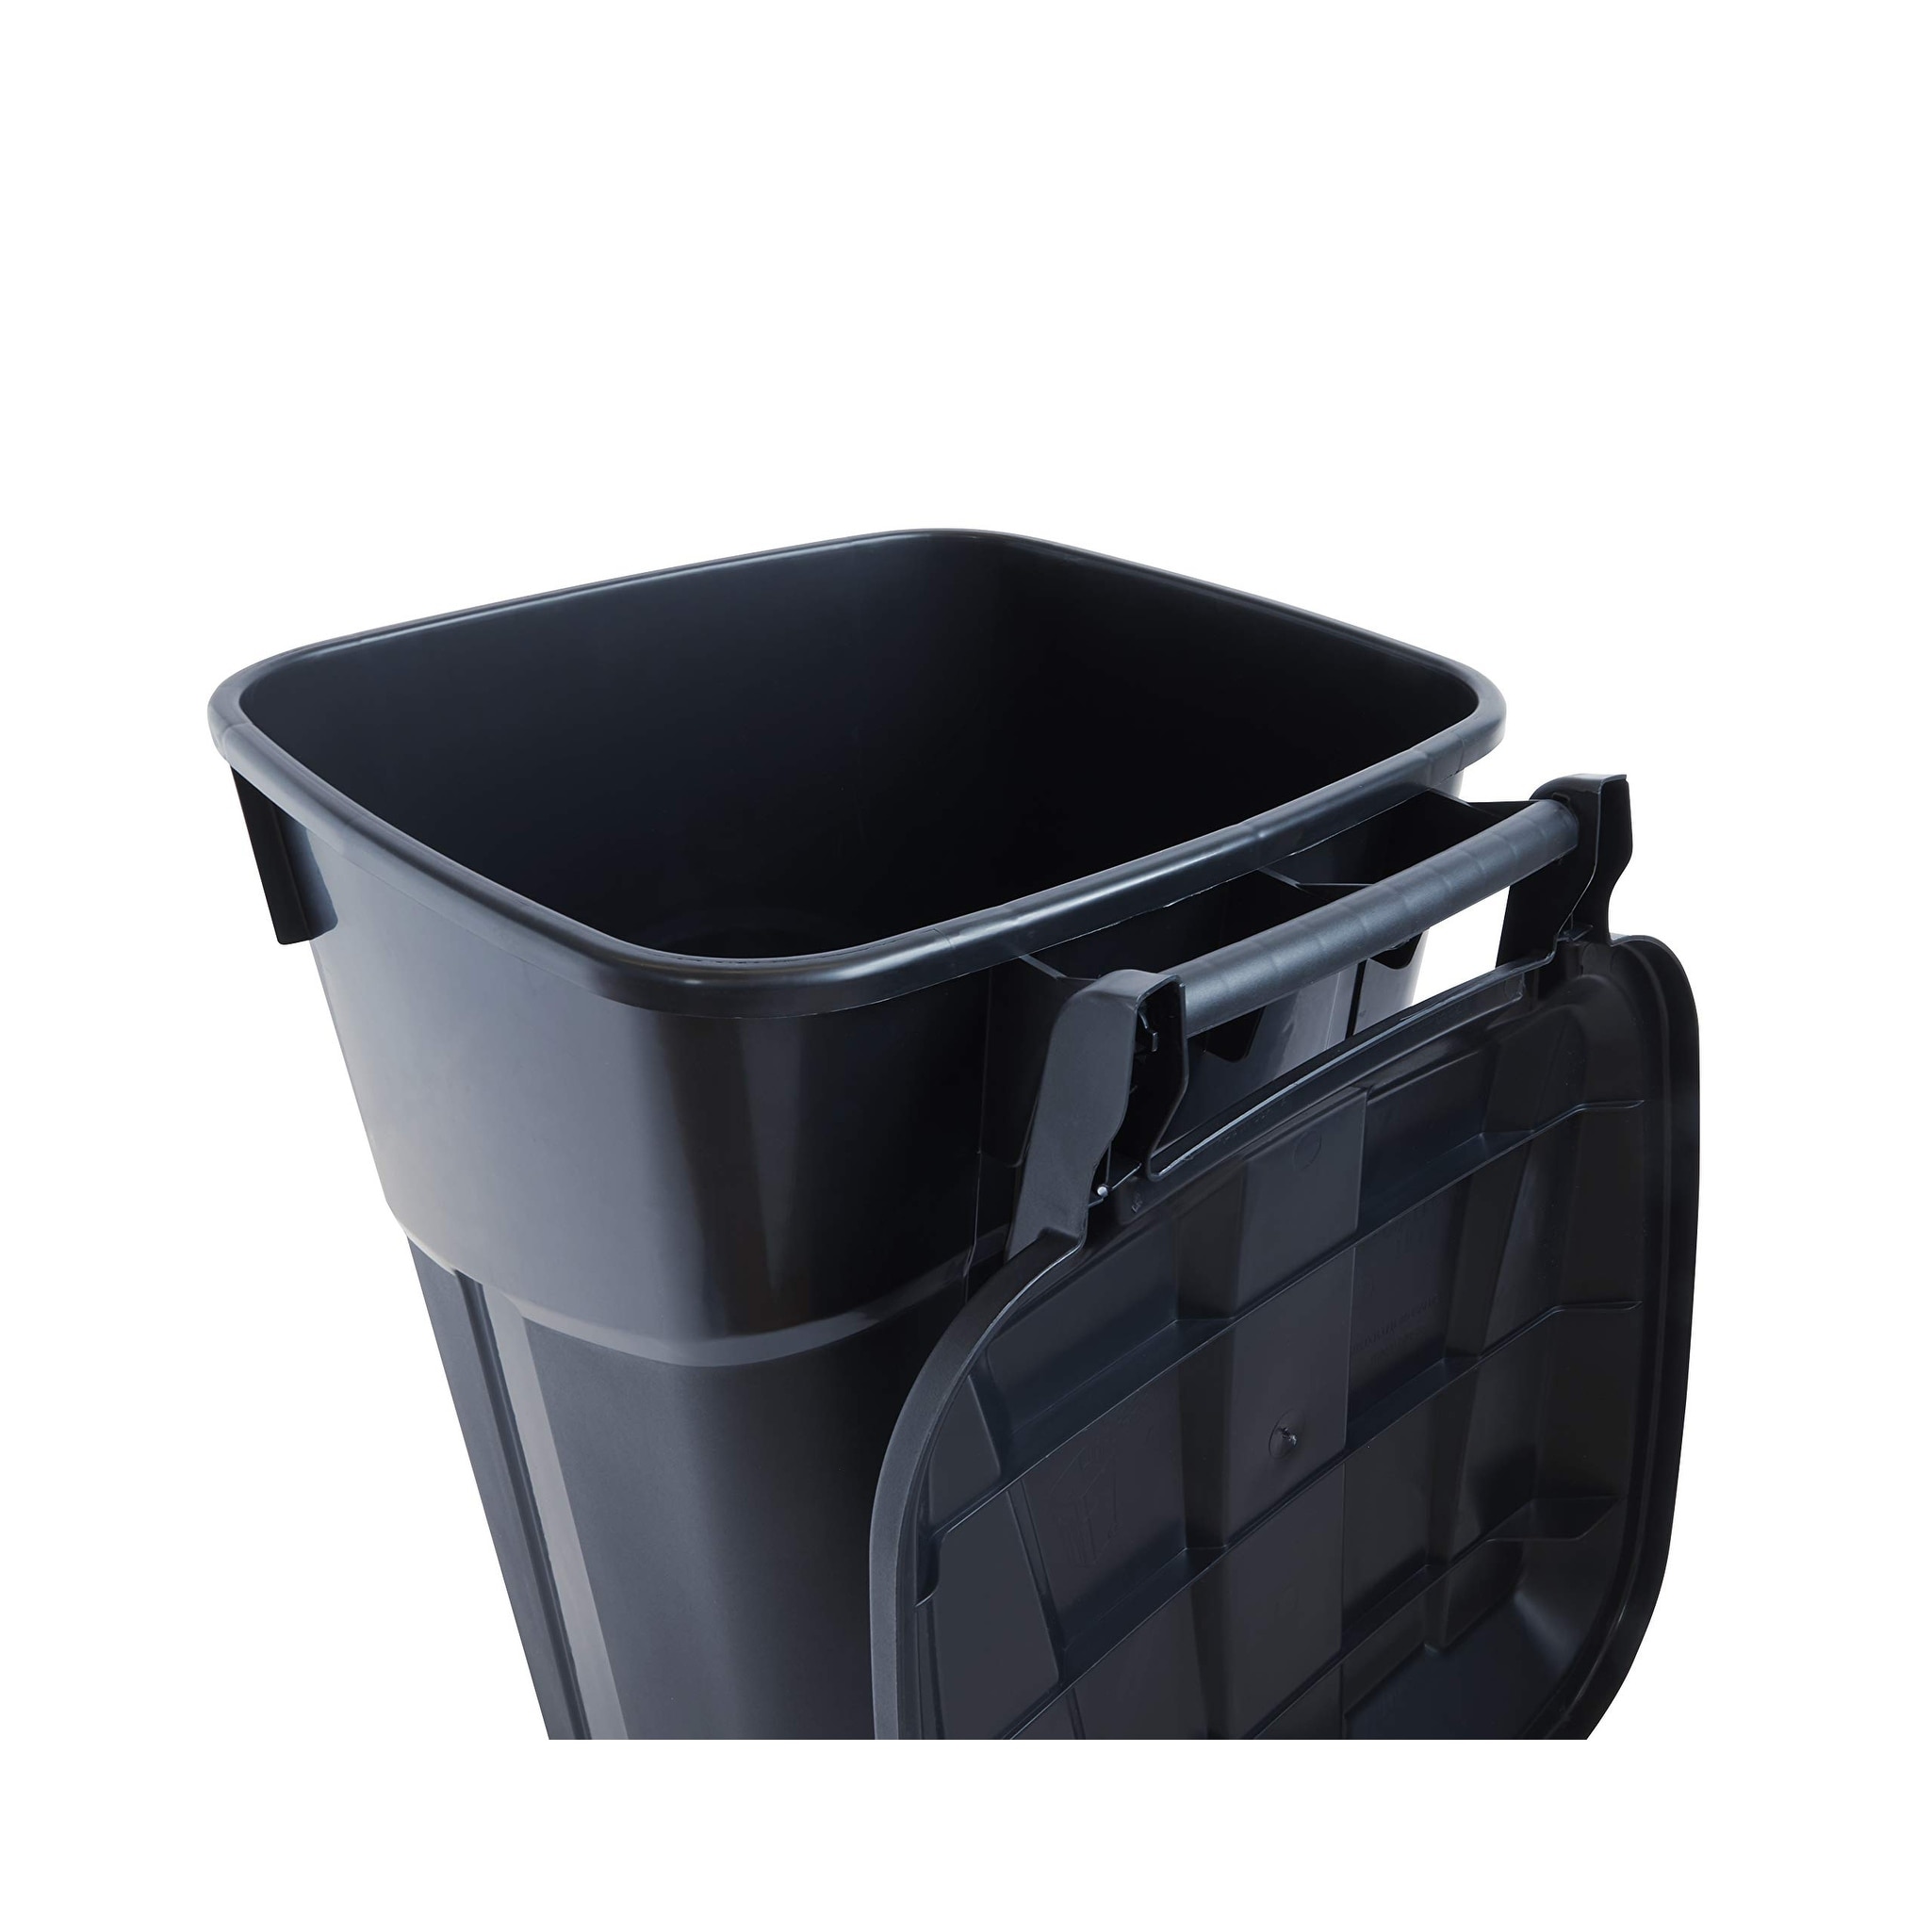 32 Gallon Wheeled Outdoor Garbage Can with Attached Snap Lock Lid and Handles, Perfect Backyard, Deck, or Garage Trash Can, 2pcs - Black